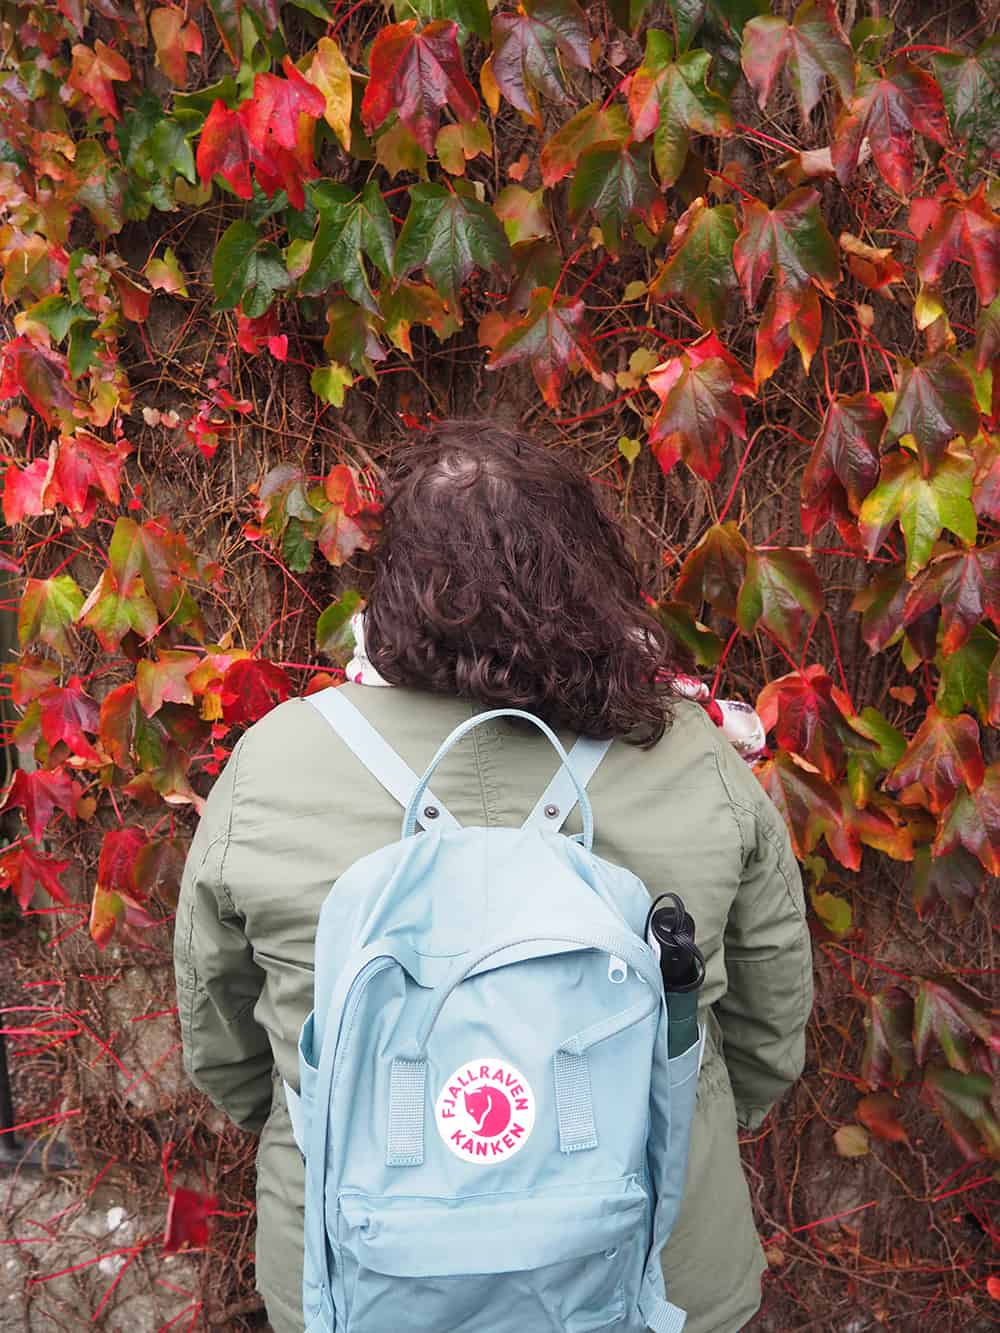 My fjallraven kanken bag was waterproof and the perfect asset for our rainy trip in Ireland. | via Autumn All Along